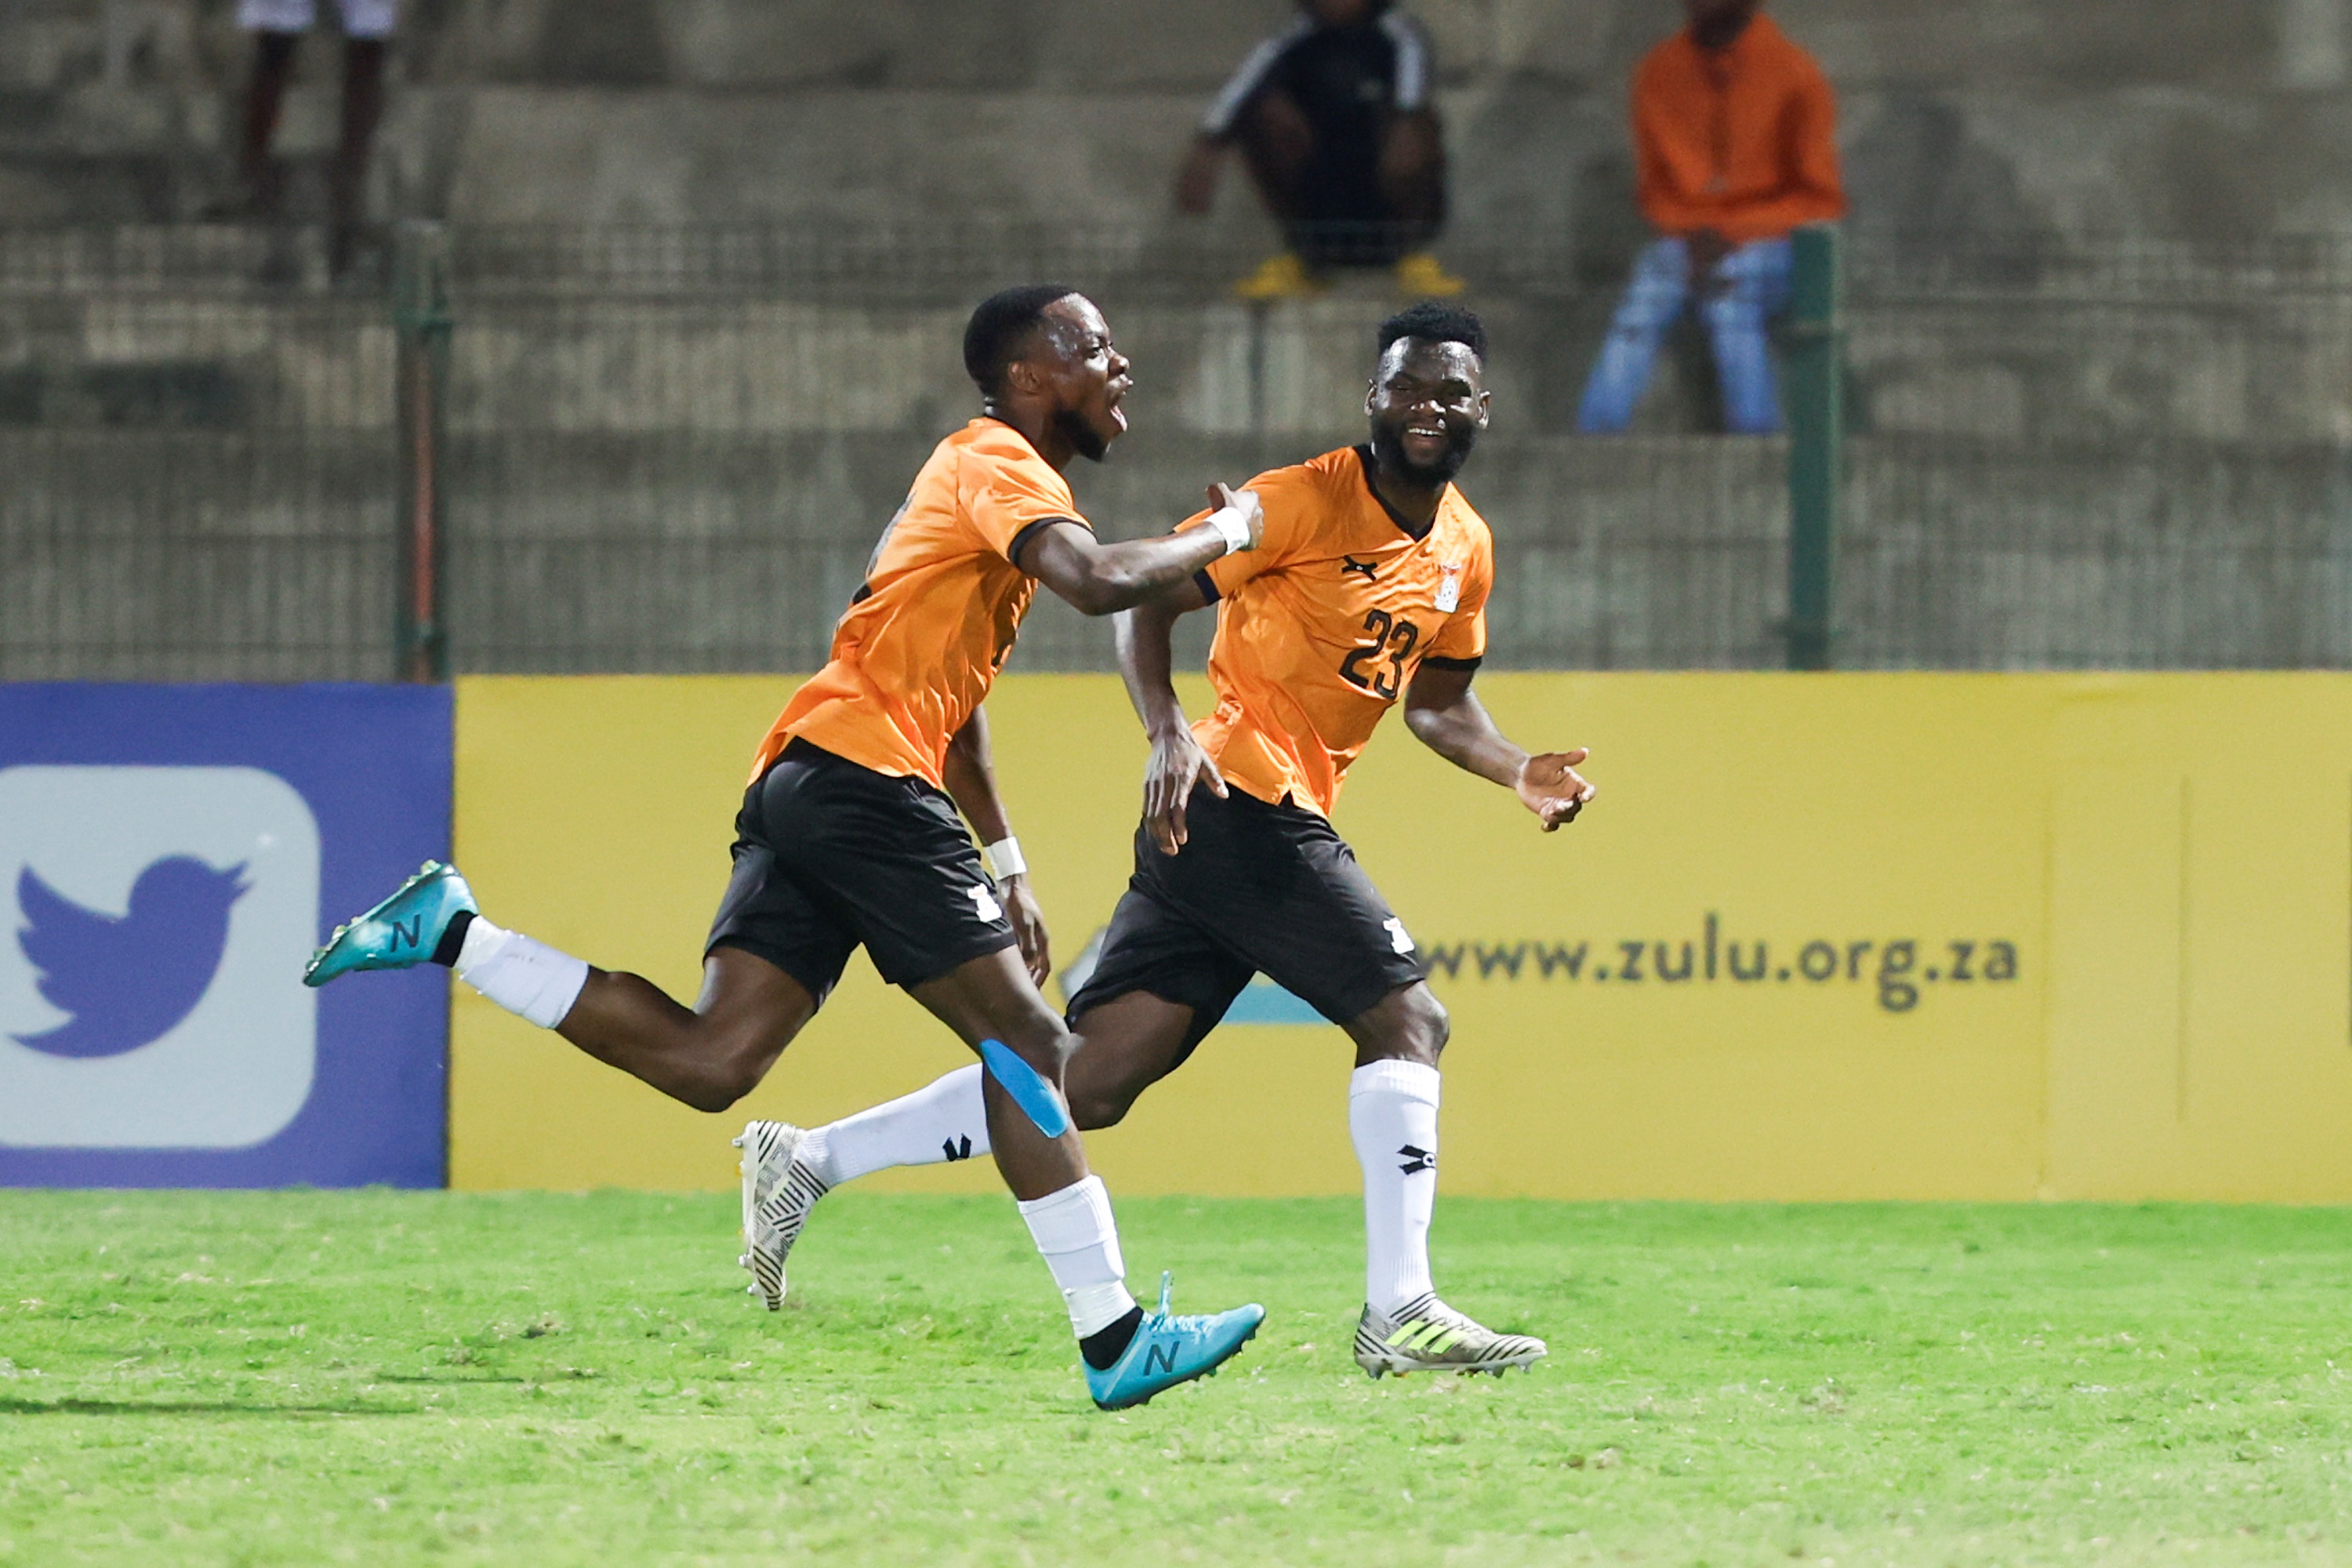 Zambian Forward Attracts PSL Clubs